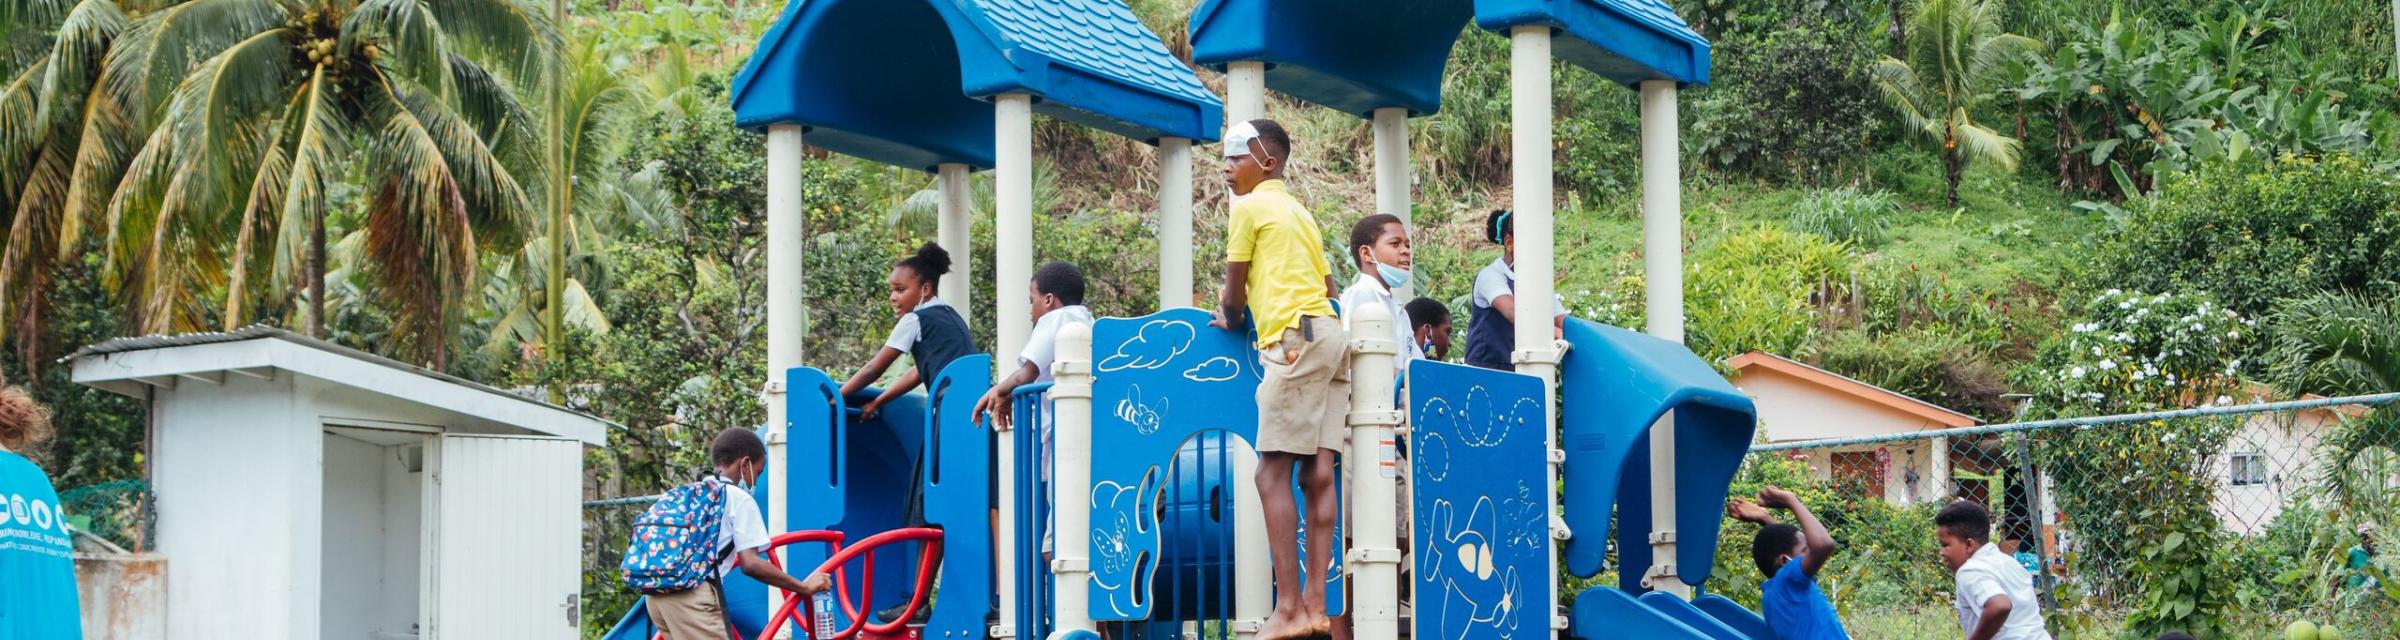 Kingstown, Saint Vincent and the Grenadines :: Children using a playground donated from the USA and assembled in the town of Mesopotamia by Logos Hope's crewmembers.